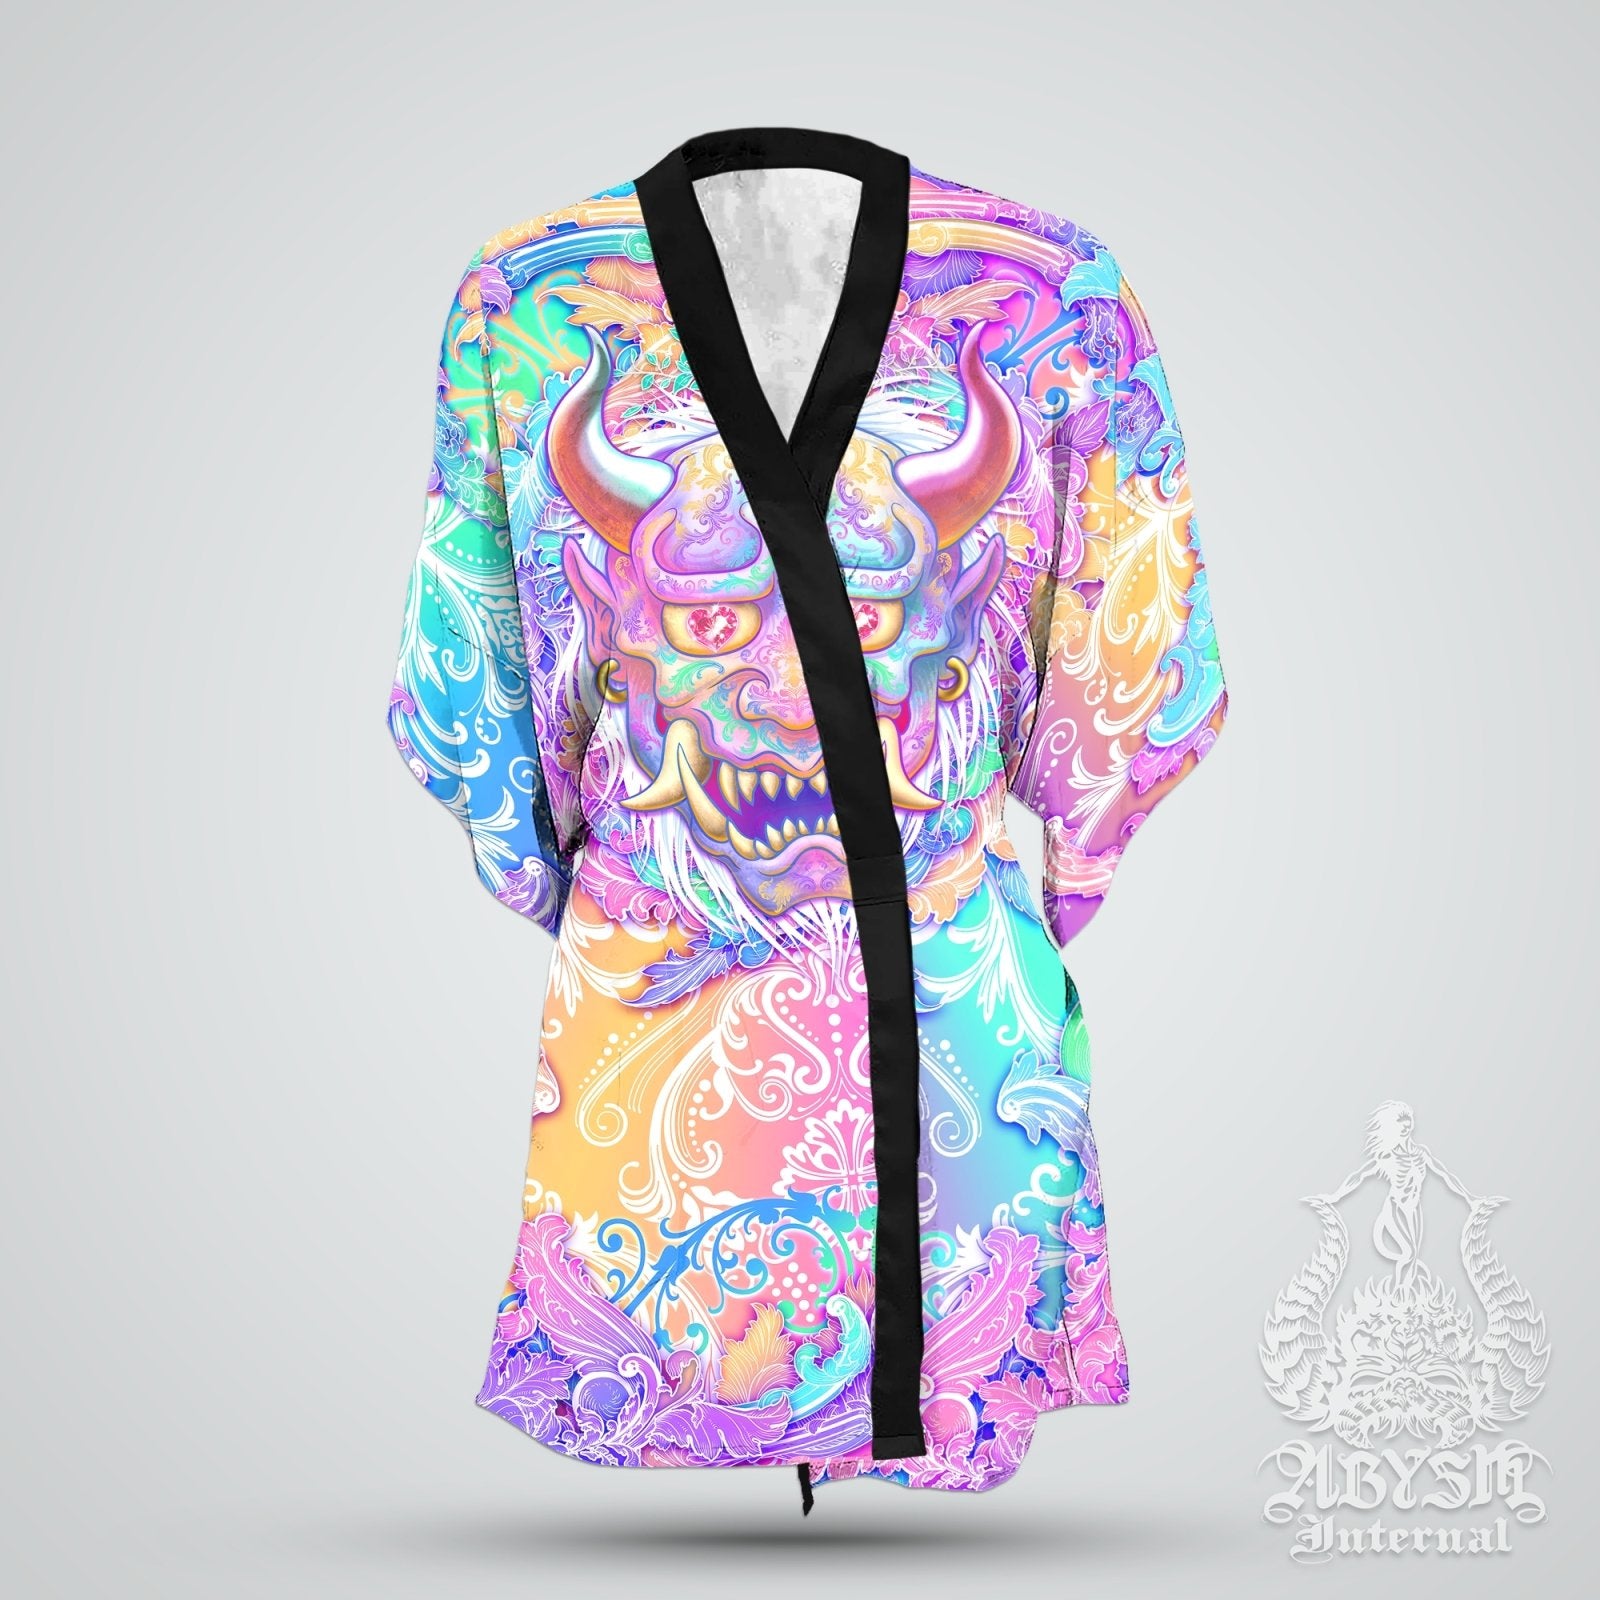 Demon Cover Up, Beach Rave Outfit, Oni Party Kimono, Japanese Summer Festival Robe, Aesthetic Indie and Alternative Clothing, Unisex - Holographic Pastel - Abysm Internal